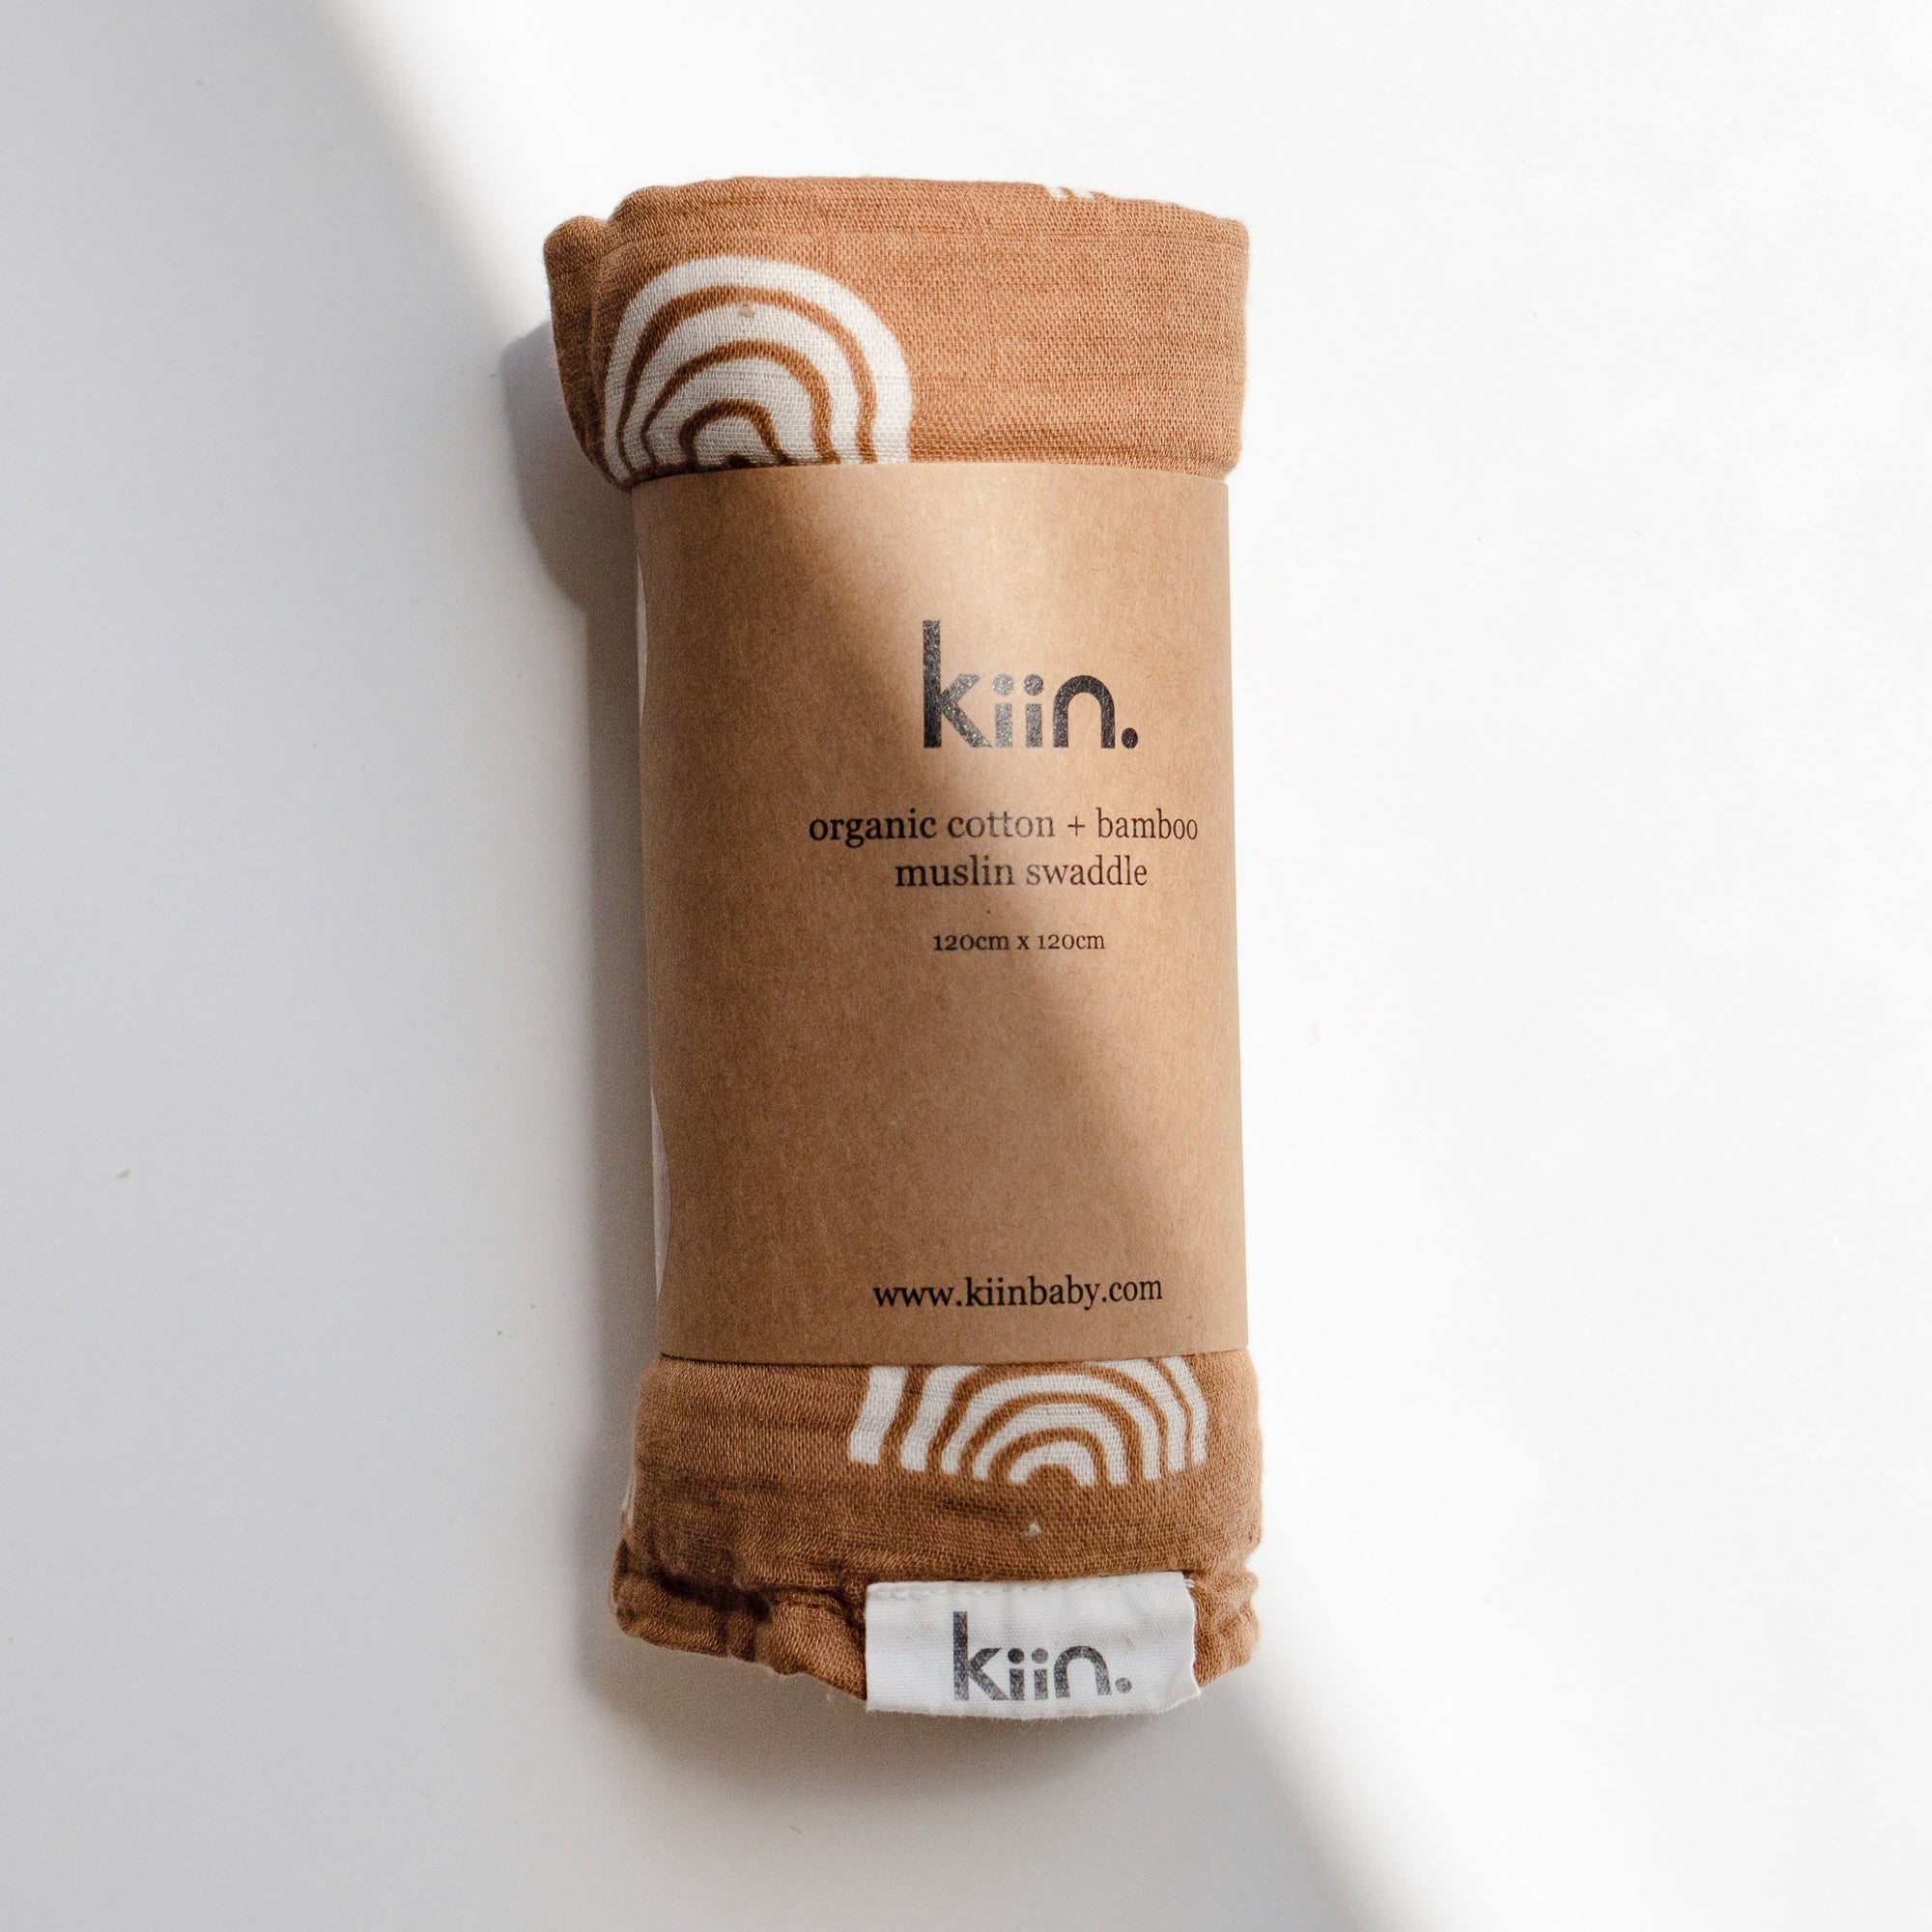 Kiin swaddles are made from the softest organic cotton + bamboo blend. The premium muslin fabric is lightweight & breathable, and incredibly soft and gentle on baby's skin; perfect for swaddling your little ones.